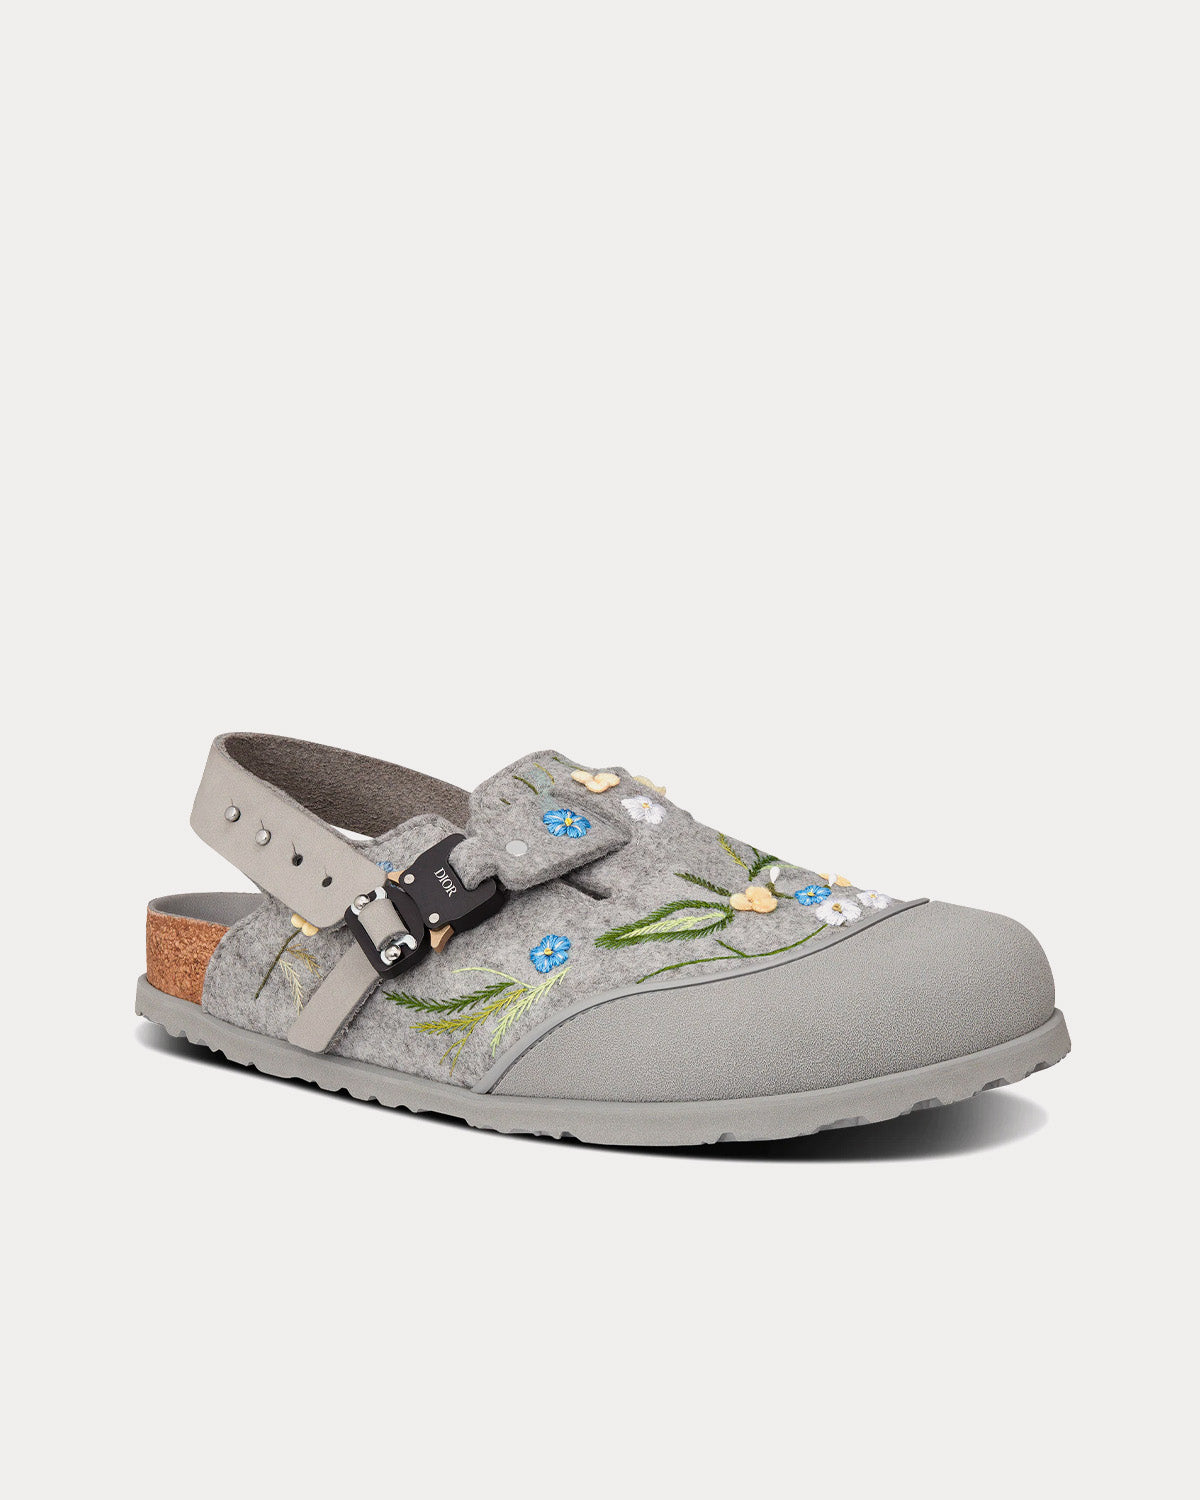 Dior x Birkenstock - Tokio Dior Gray Felted Wool Embroidered with Flowers and Nubuck Calfskin Mules